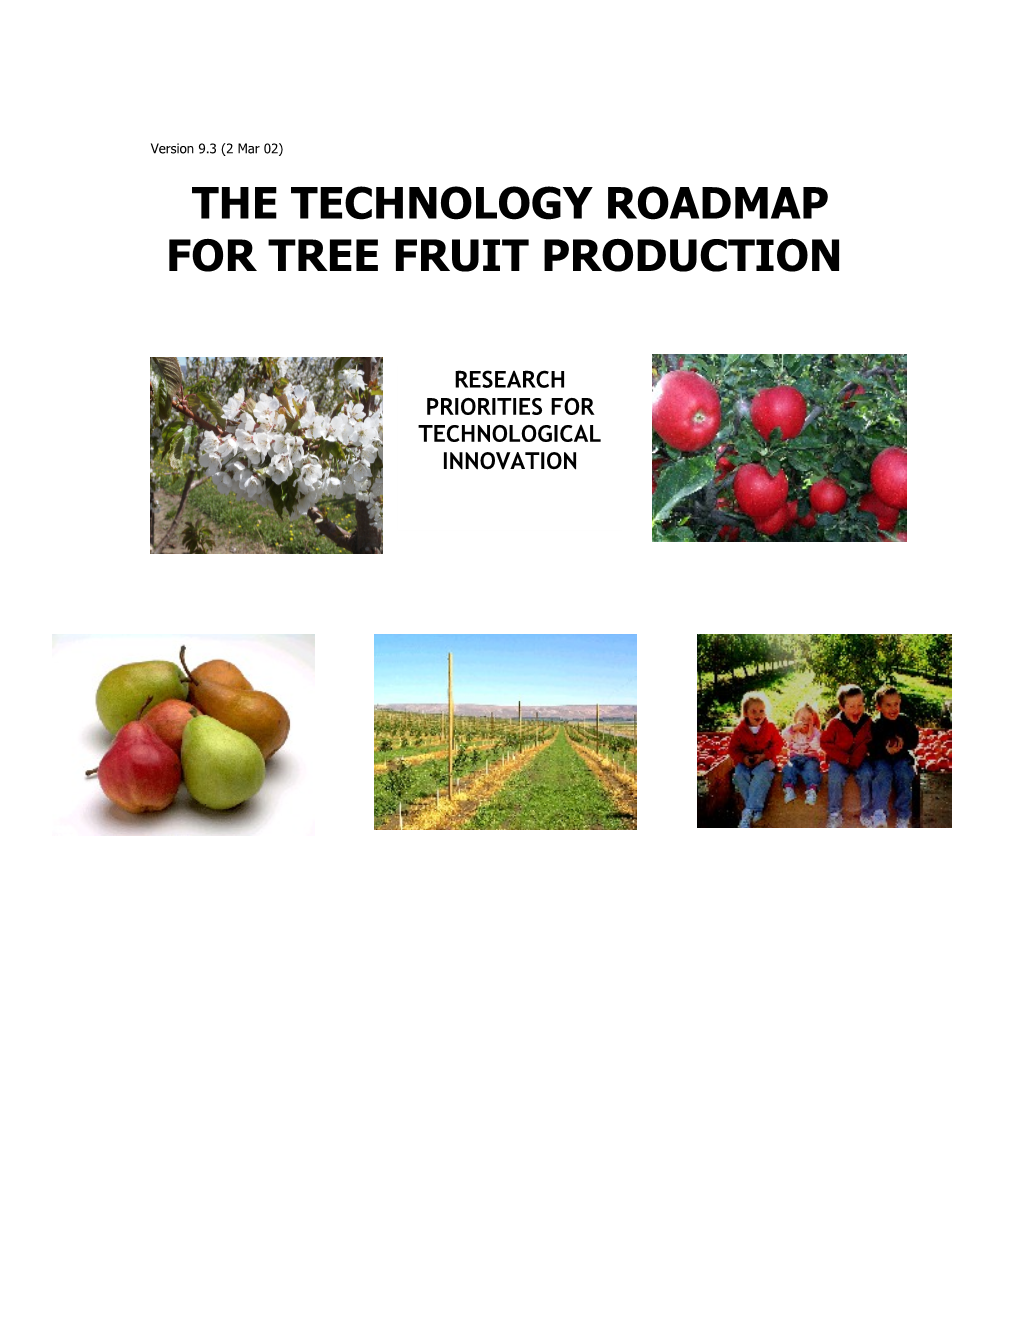 The Technology Roadmap for Tree Fruit Production 2010